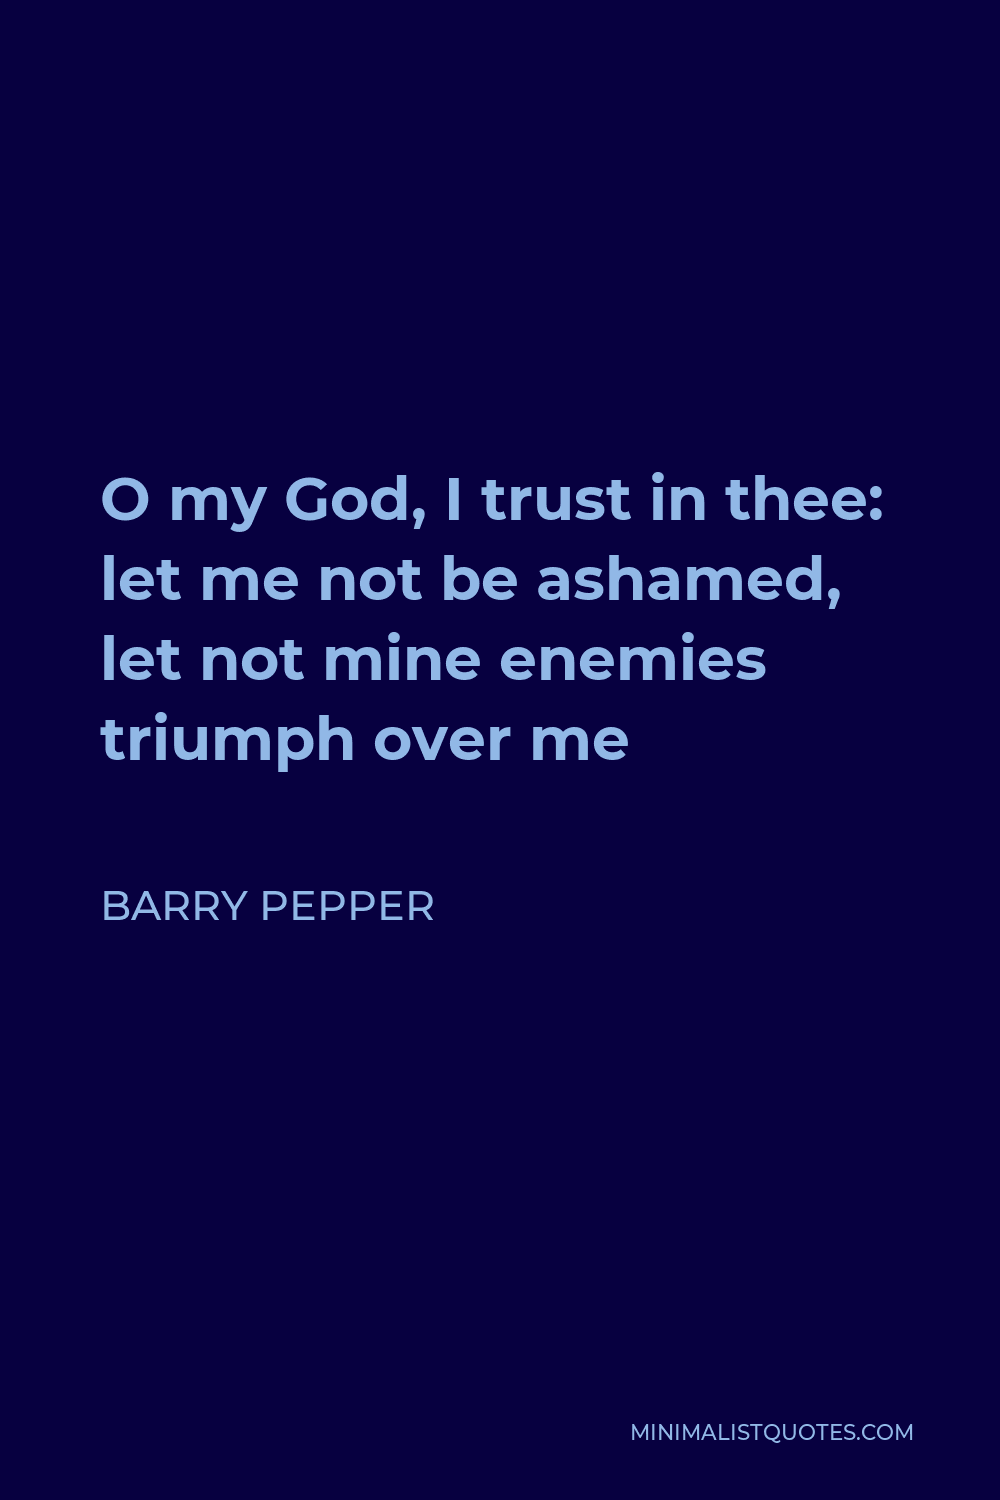 Barry Pepper Quote - O my God, I trust in thee: let me not be ashamed, let not mine enemies triumph over me